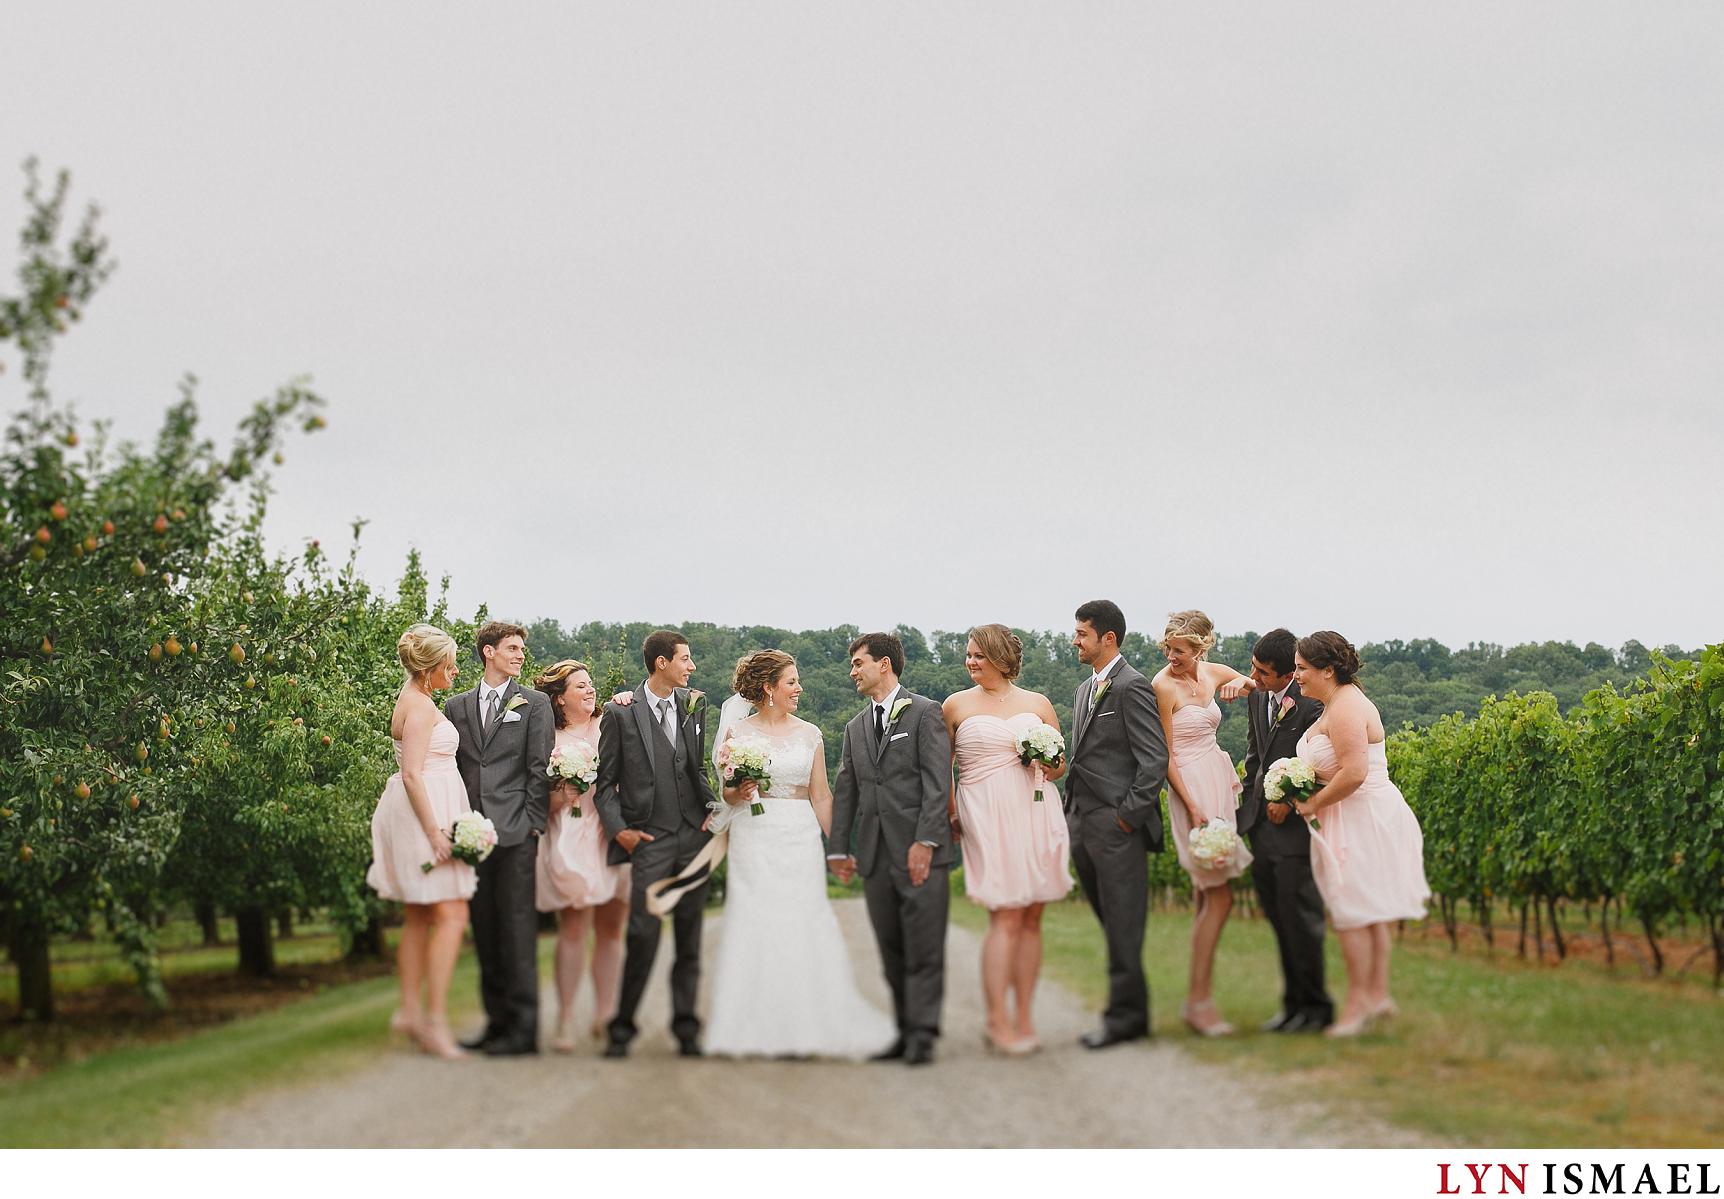 Wedding party poses with the bride and groom at Puddicombe Farms